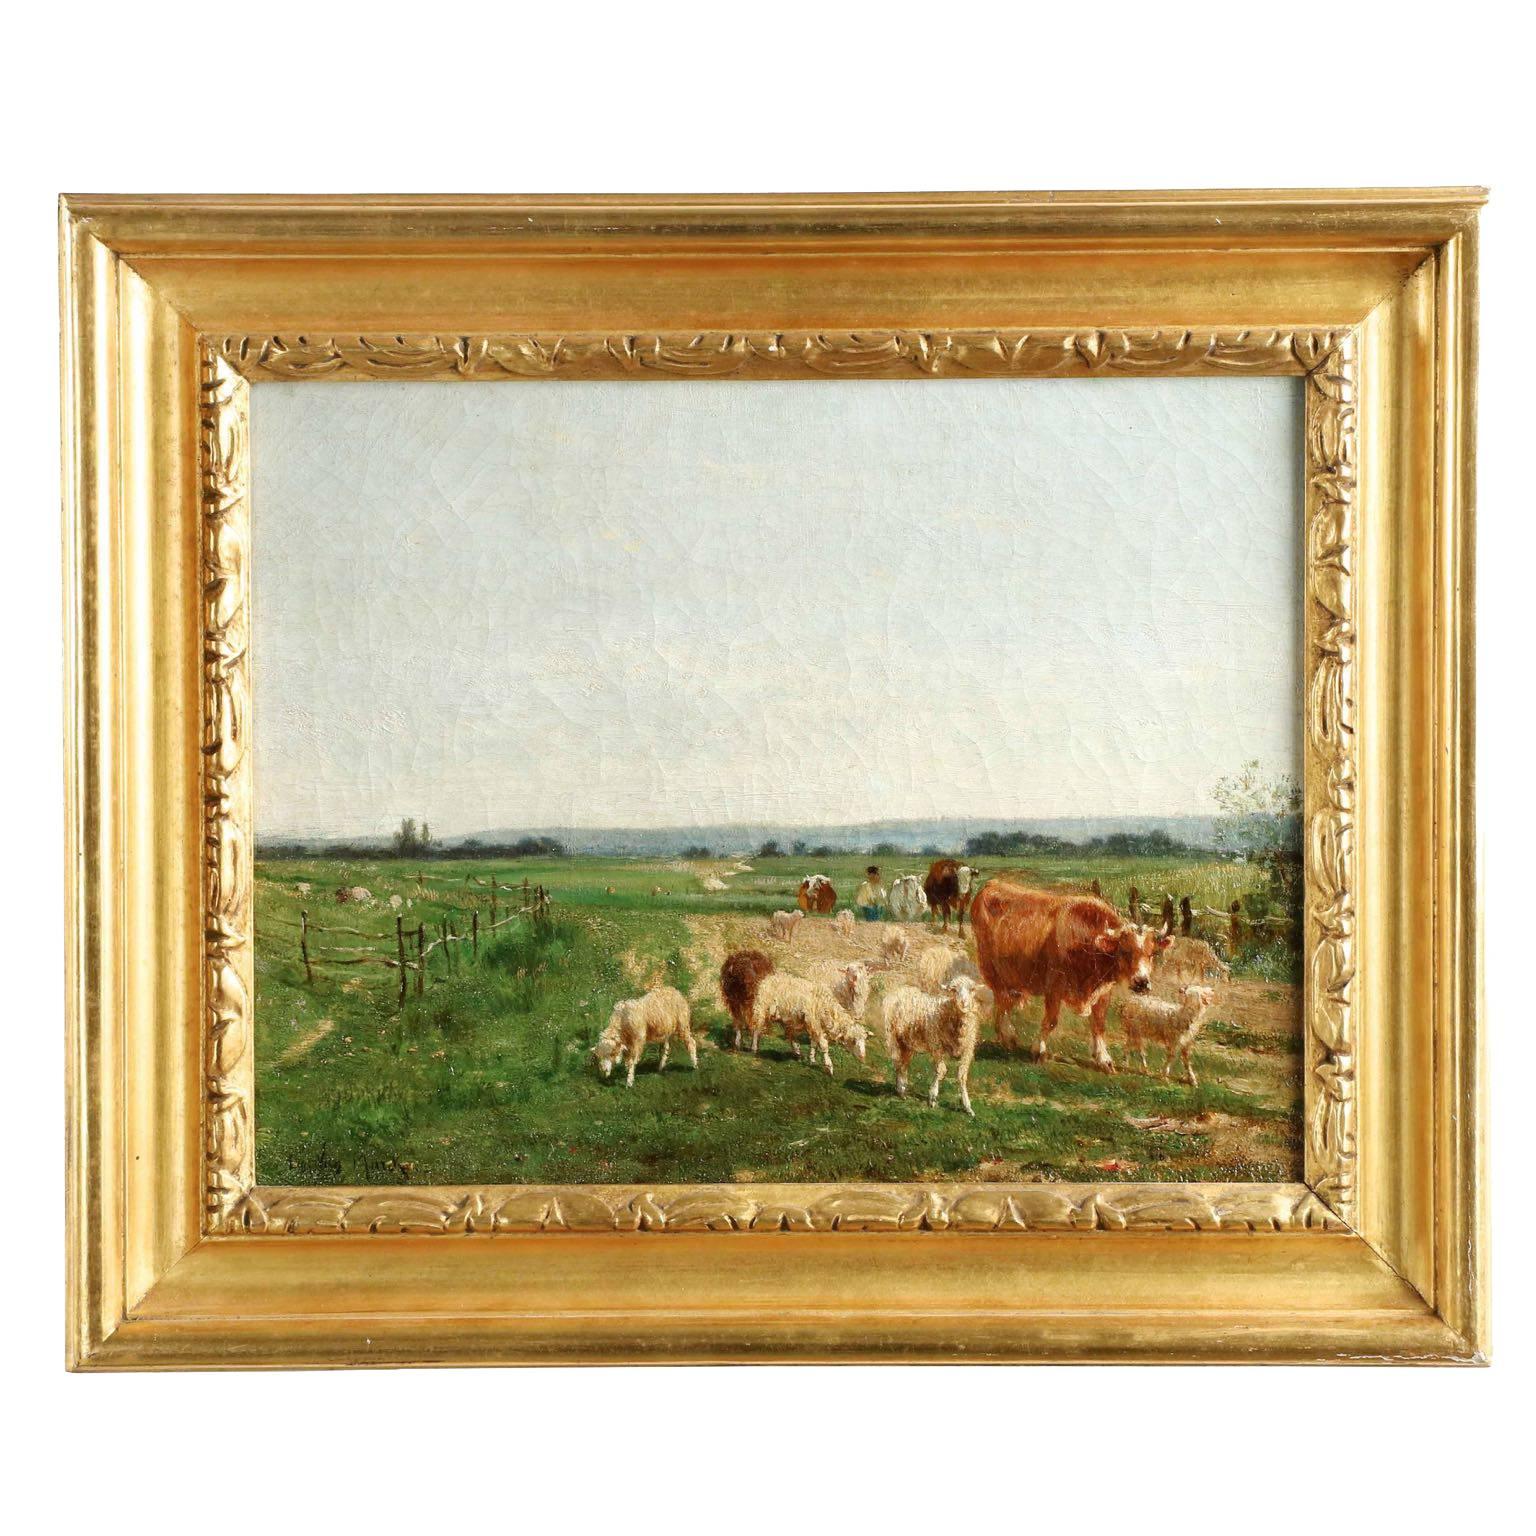 Fine Antique Painting of "Herding Cows and Sheep" by Emile van Marcke